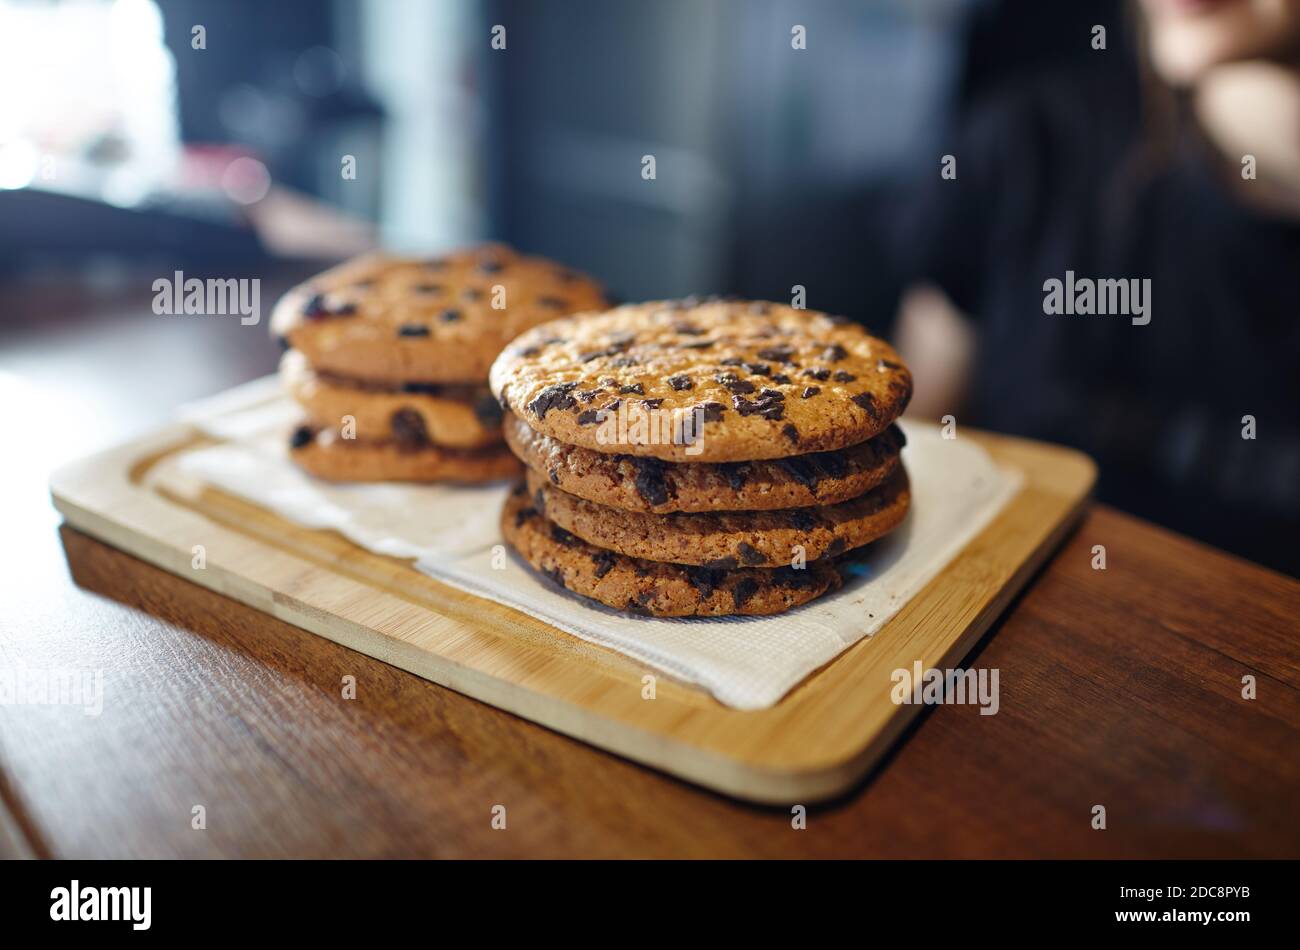 Tasty cookie at bar counter in coffee shop. Blurred image, selective focus Stock Photo